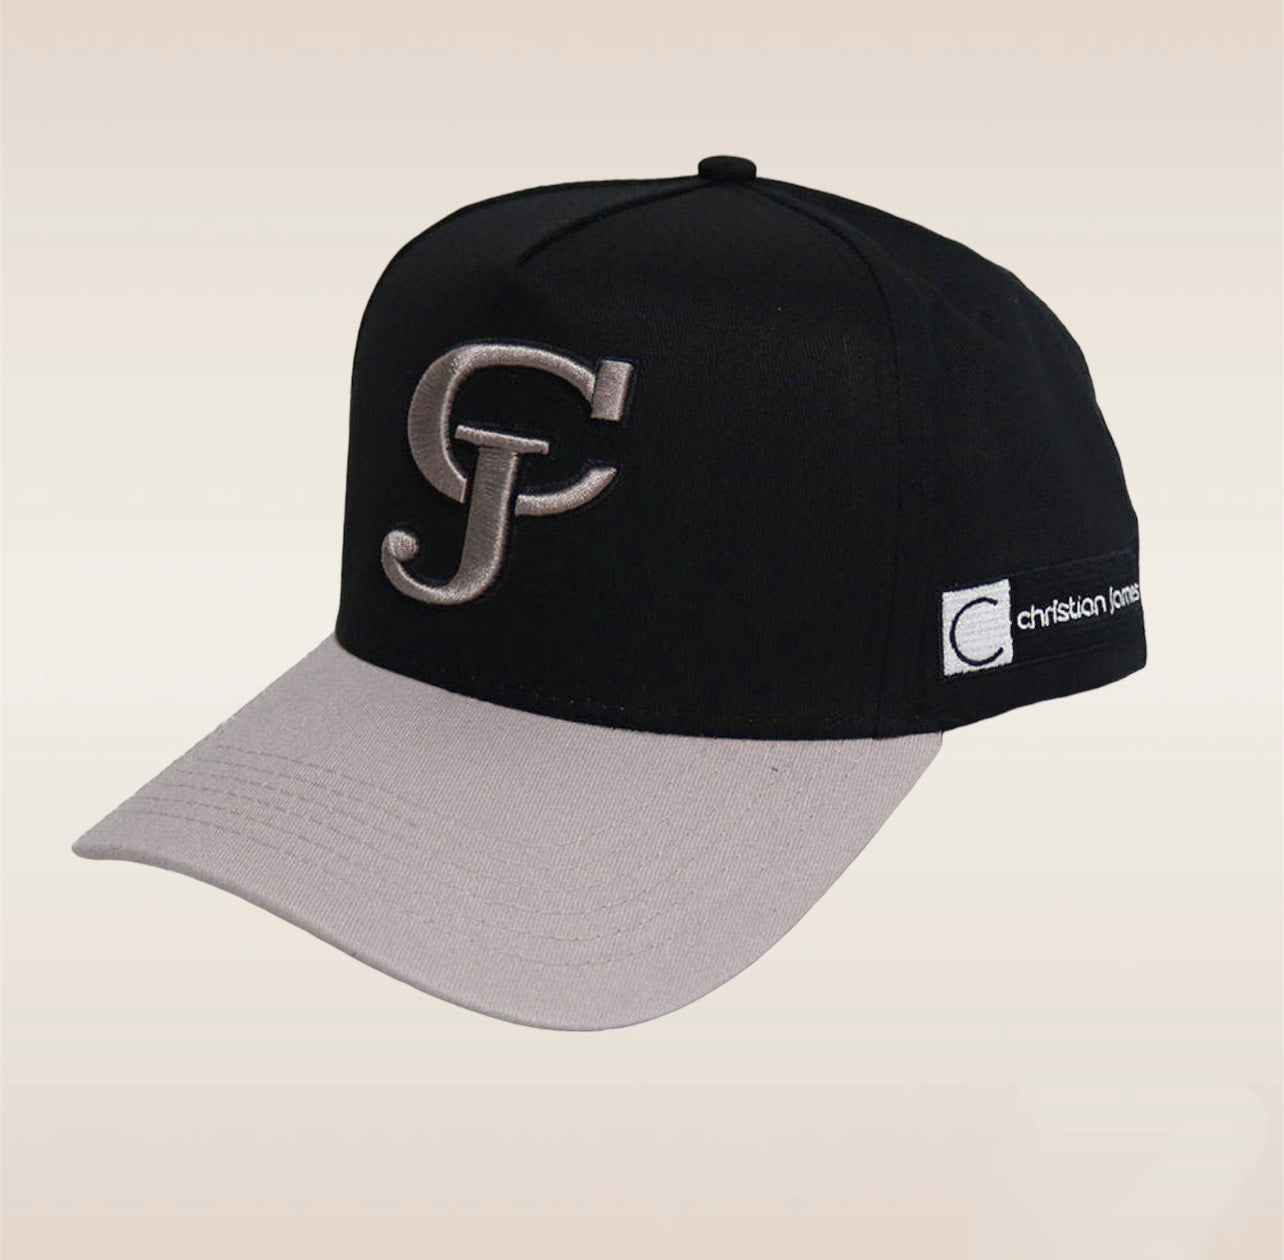 Black & Grey Classic Christian James Snapback. Get yours today!